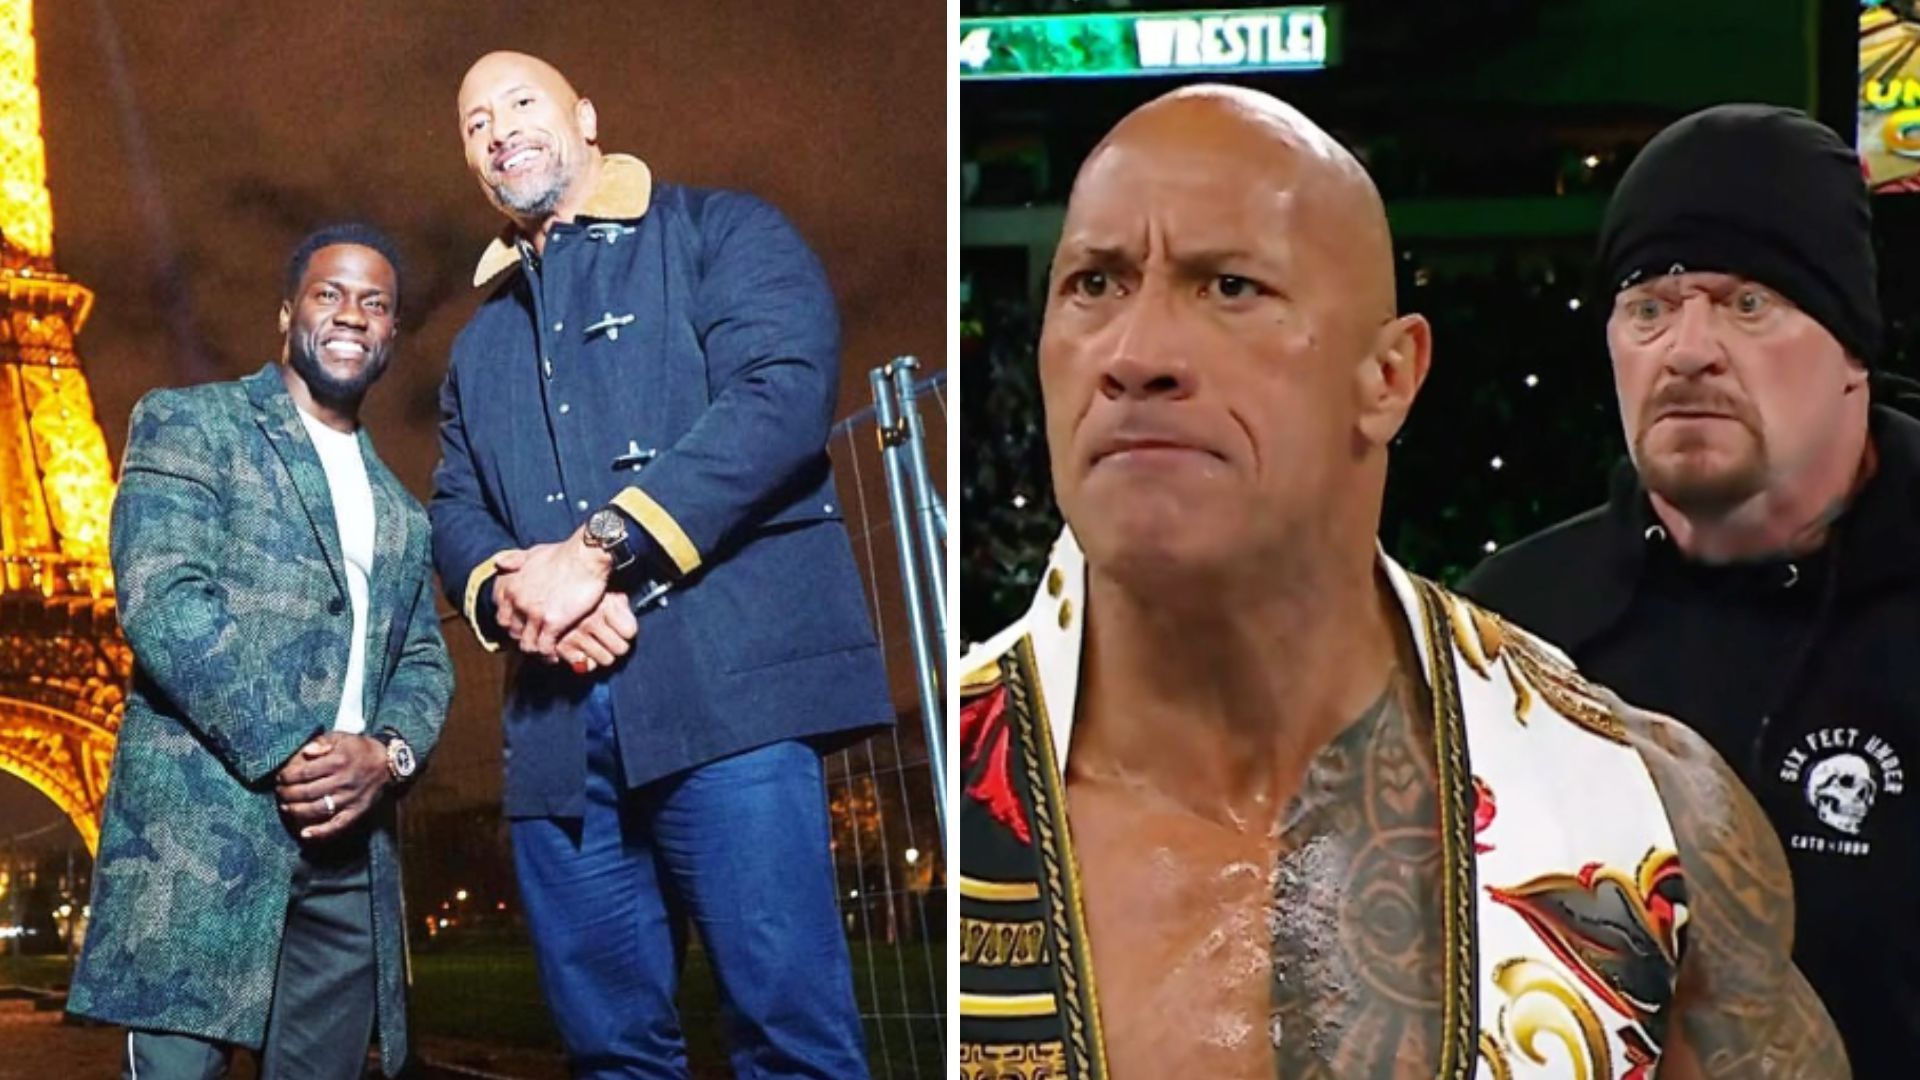 The Rock is a 17-time WWE champion [Image credits: stars